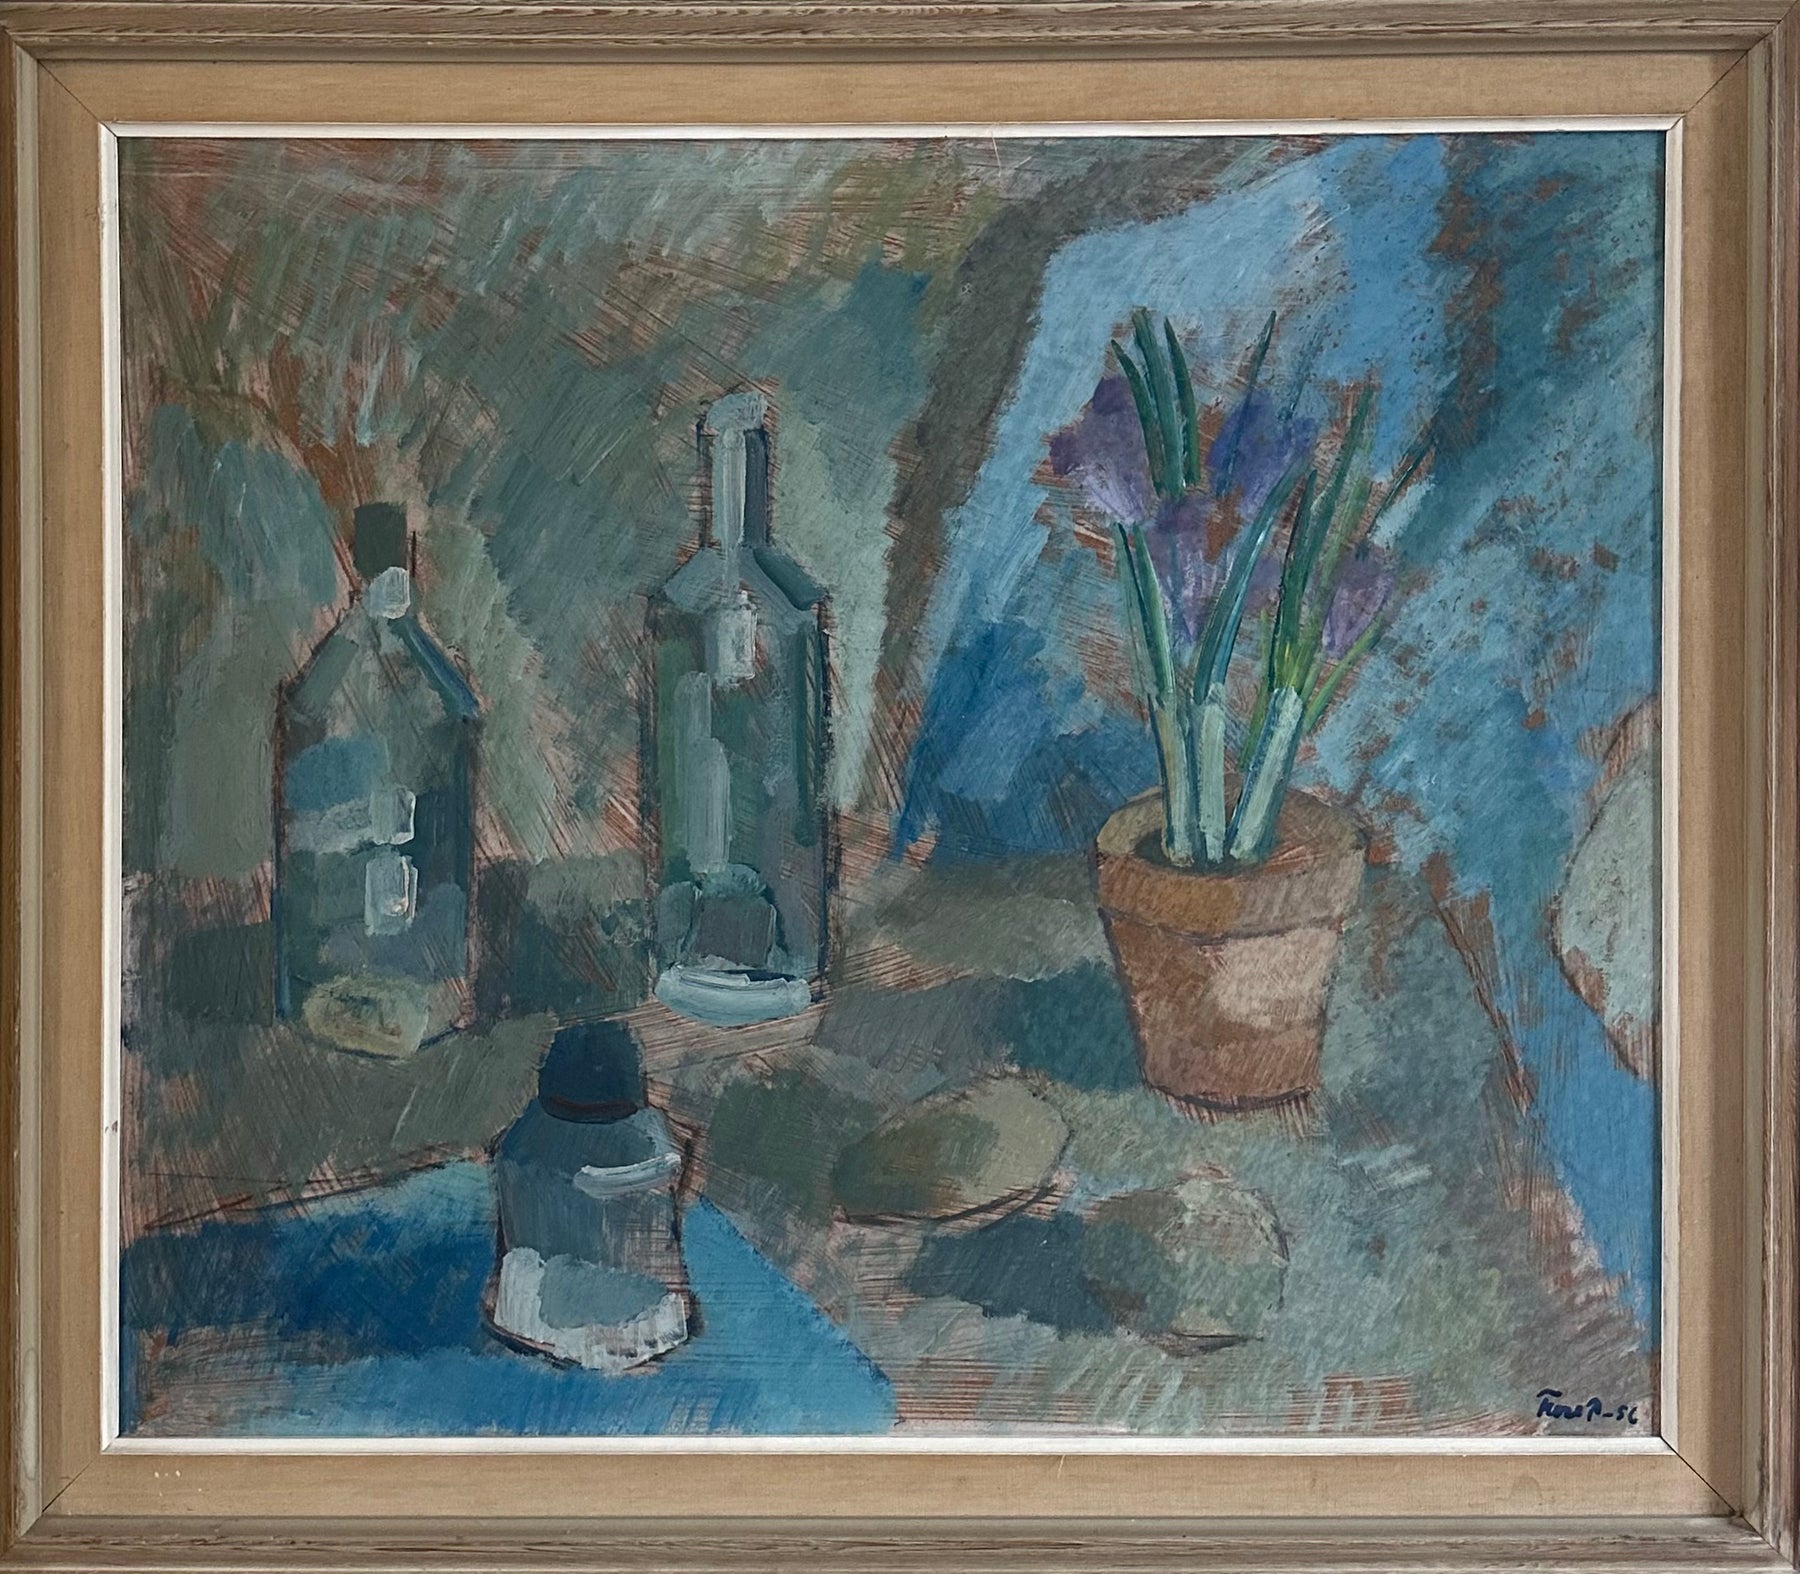 Dark still life vintage and decorative art painting depicting multiple objects on a table including a glass bottles and plants.